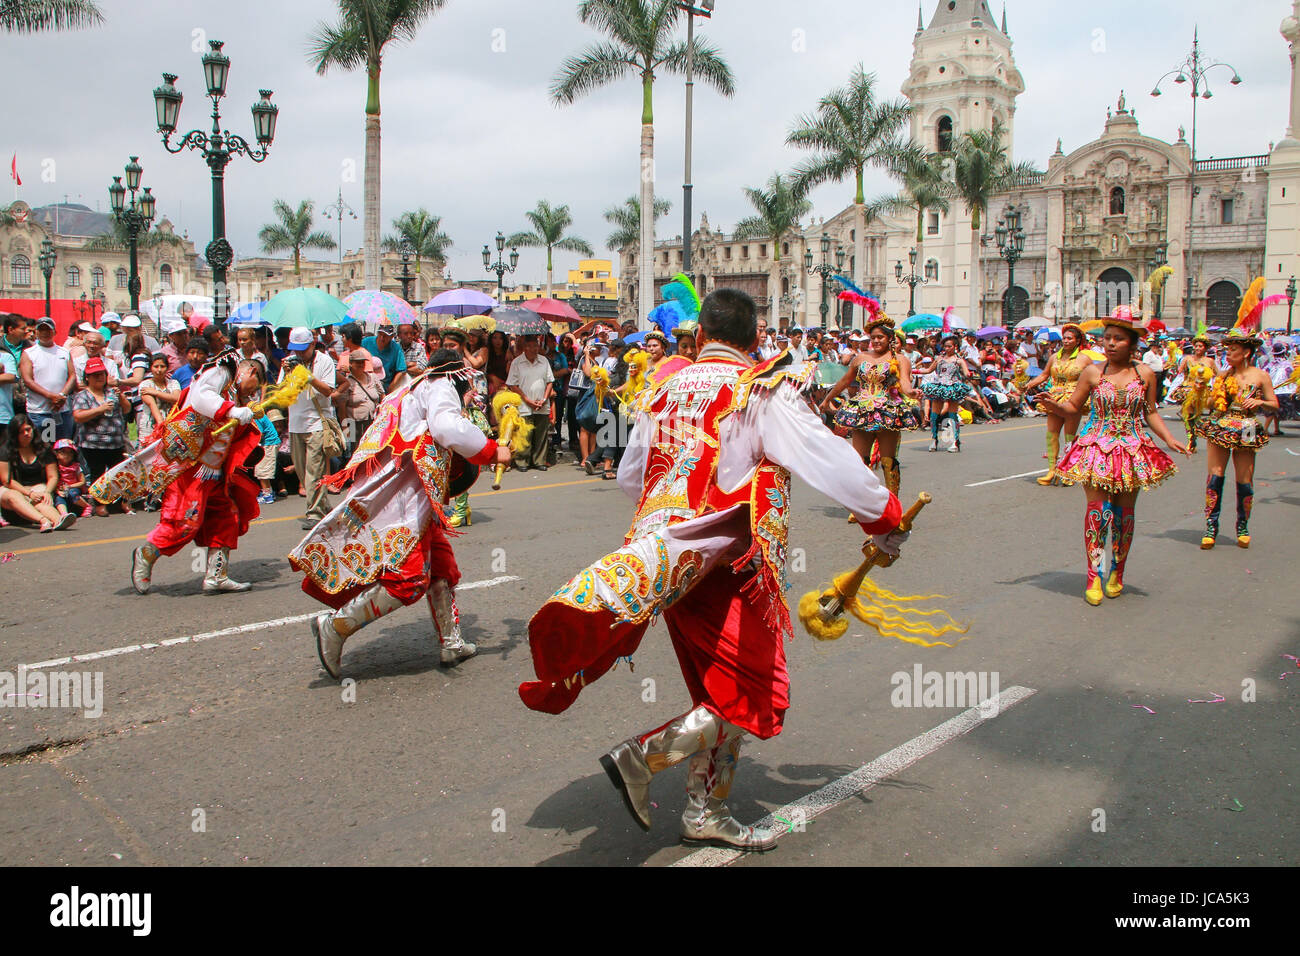 Local men dancing during Festival of the Virgin de la Candelaria in Lima, Peru. The core of the festival is dancing and music performed by different d Stock Photo